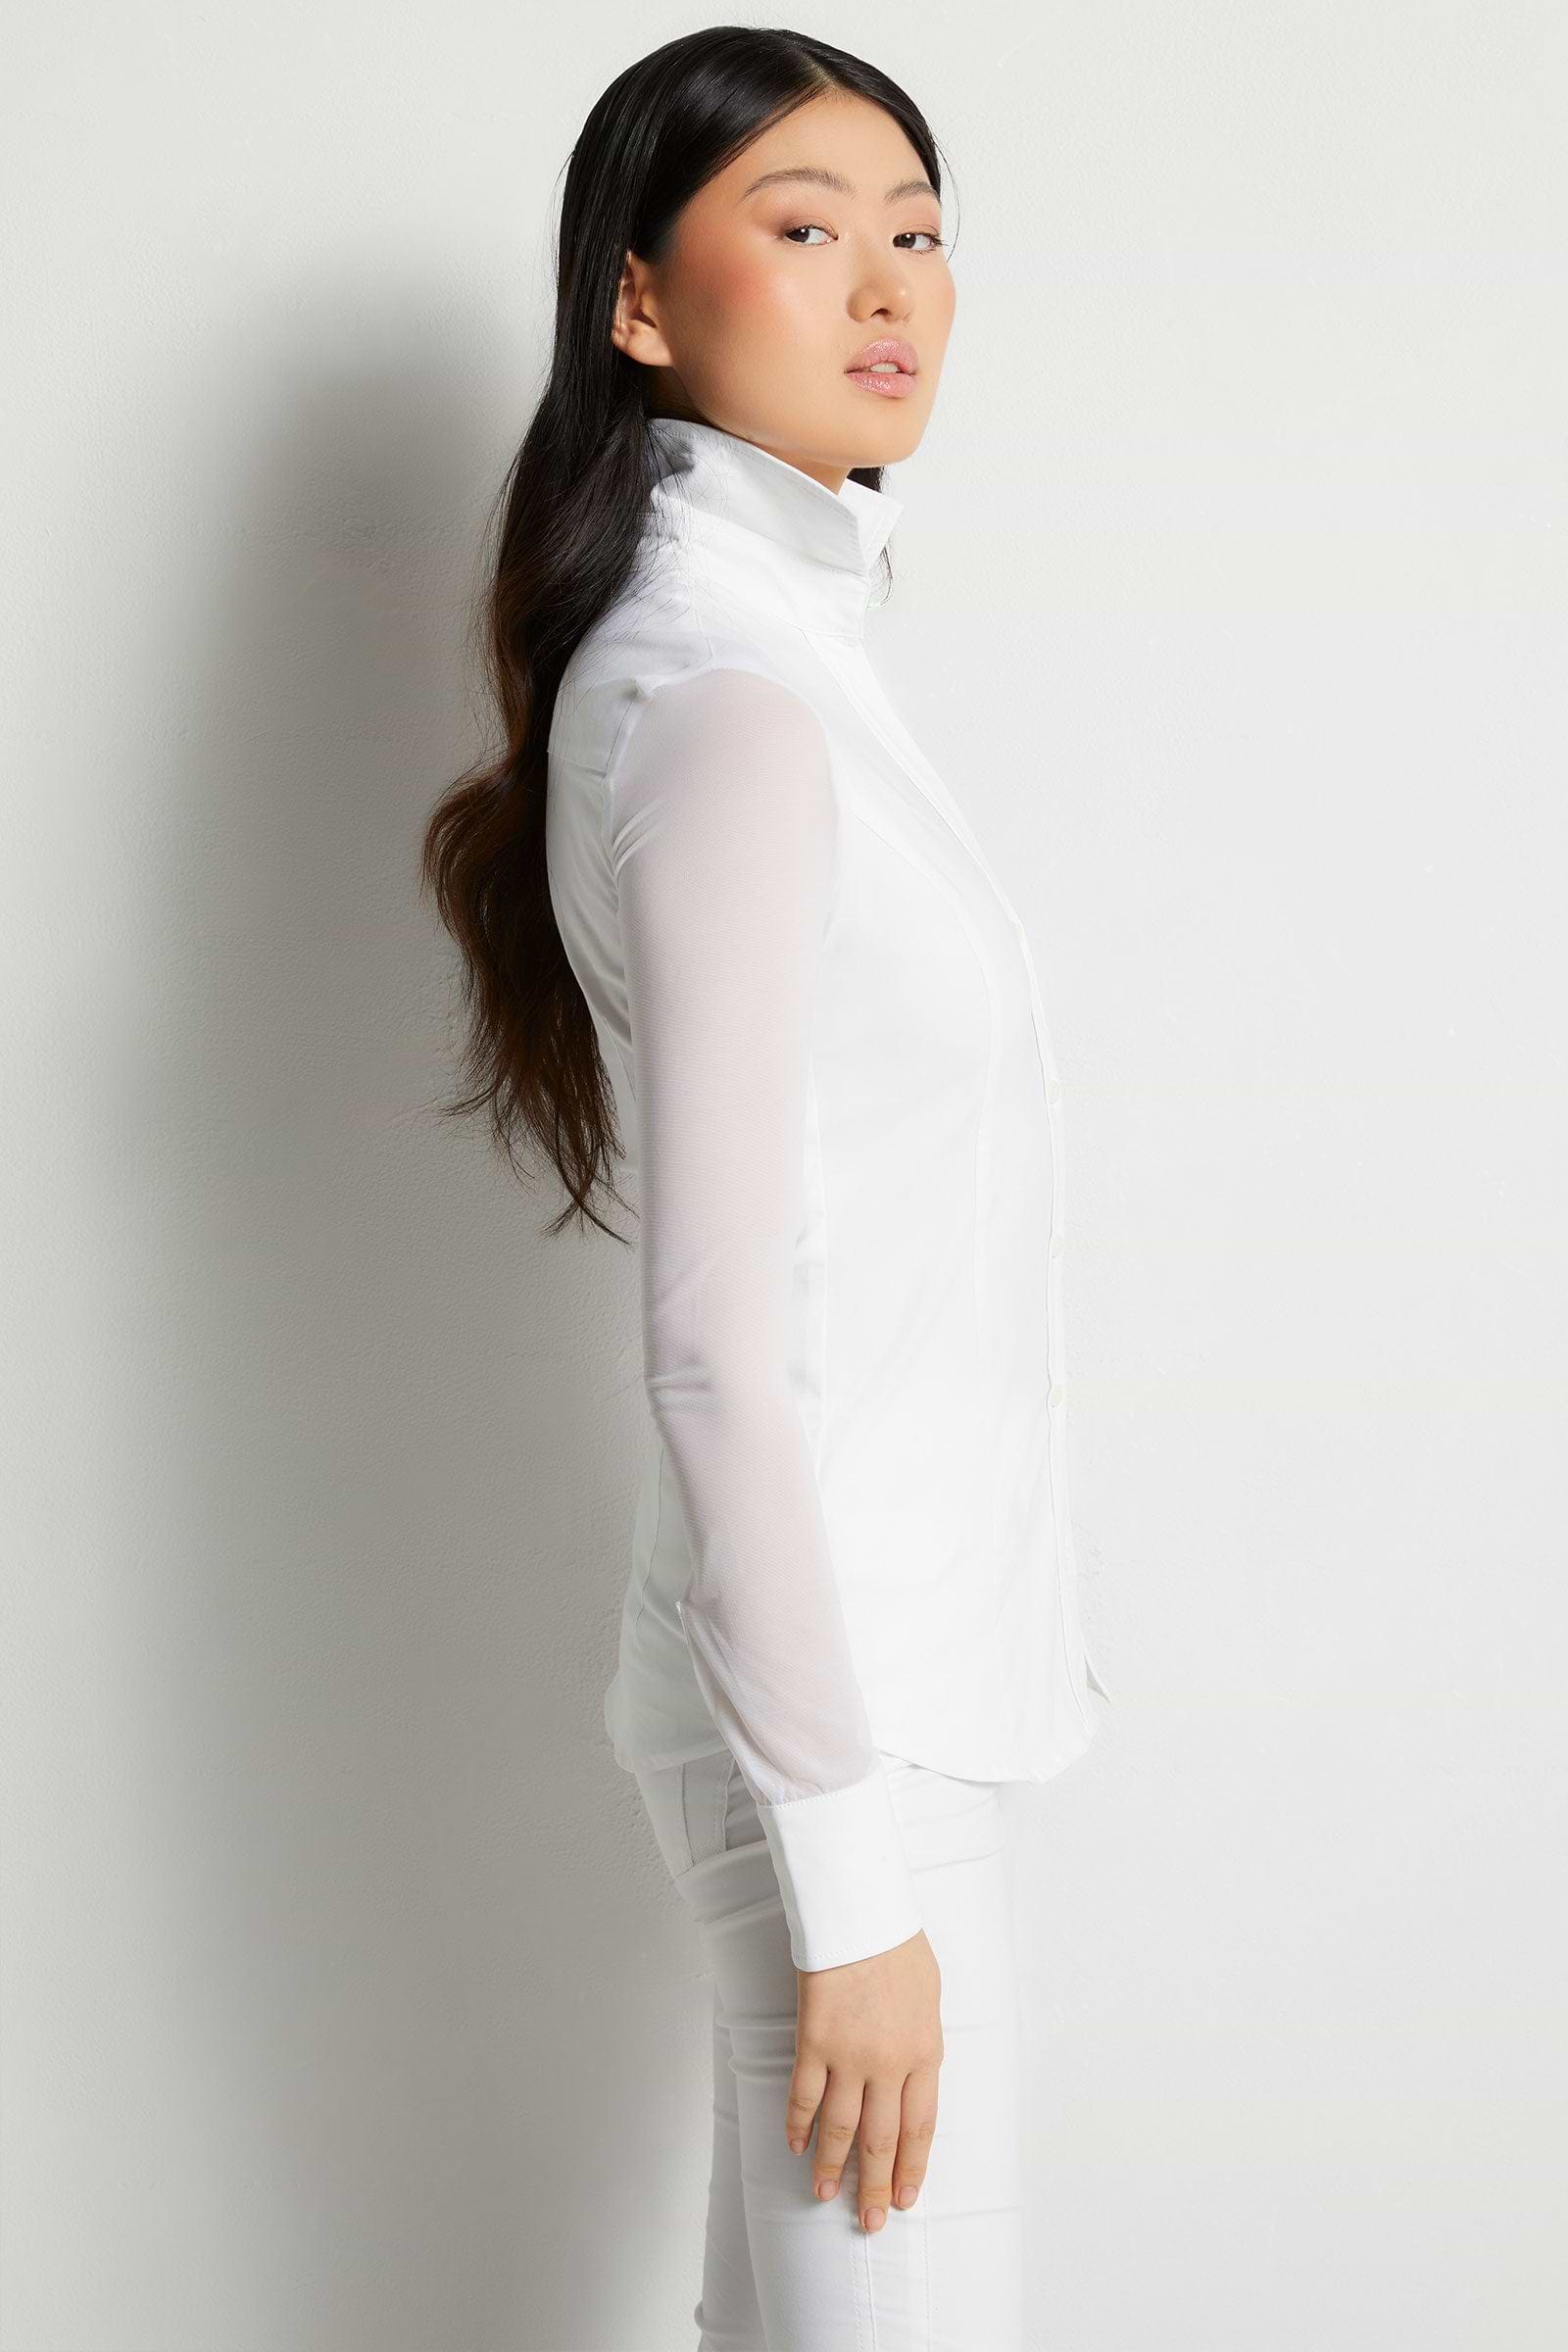 The Best Travel Shirt. Woman Showing the Side Profile of a Beth Button Front Shirt in White